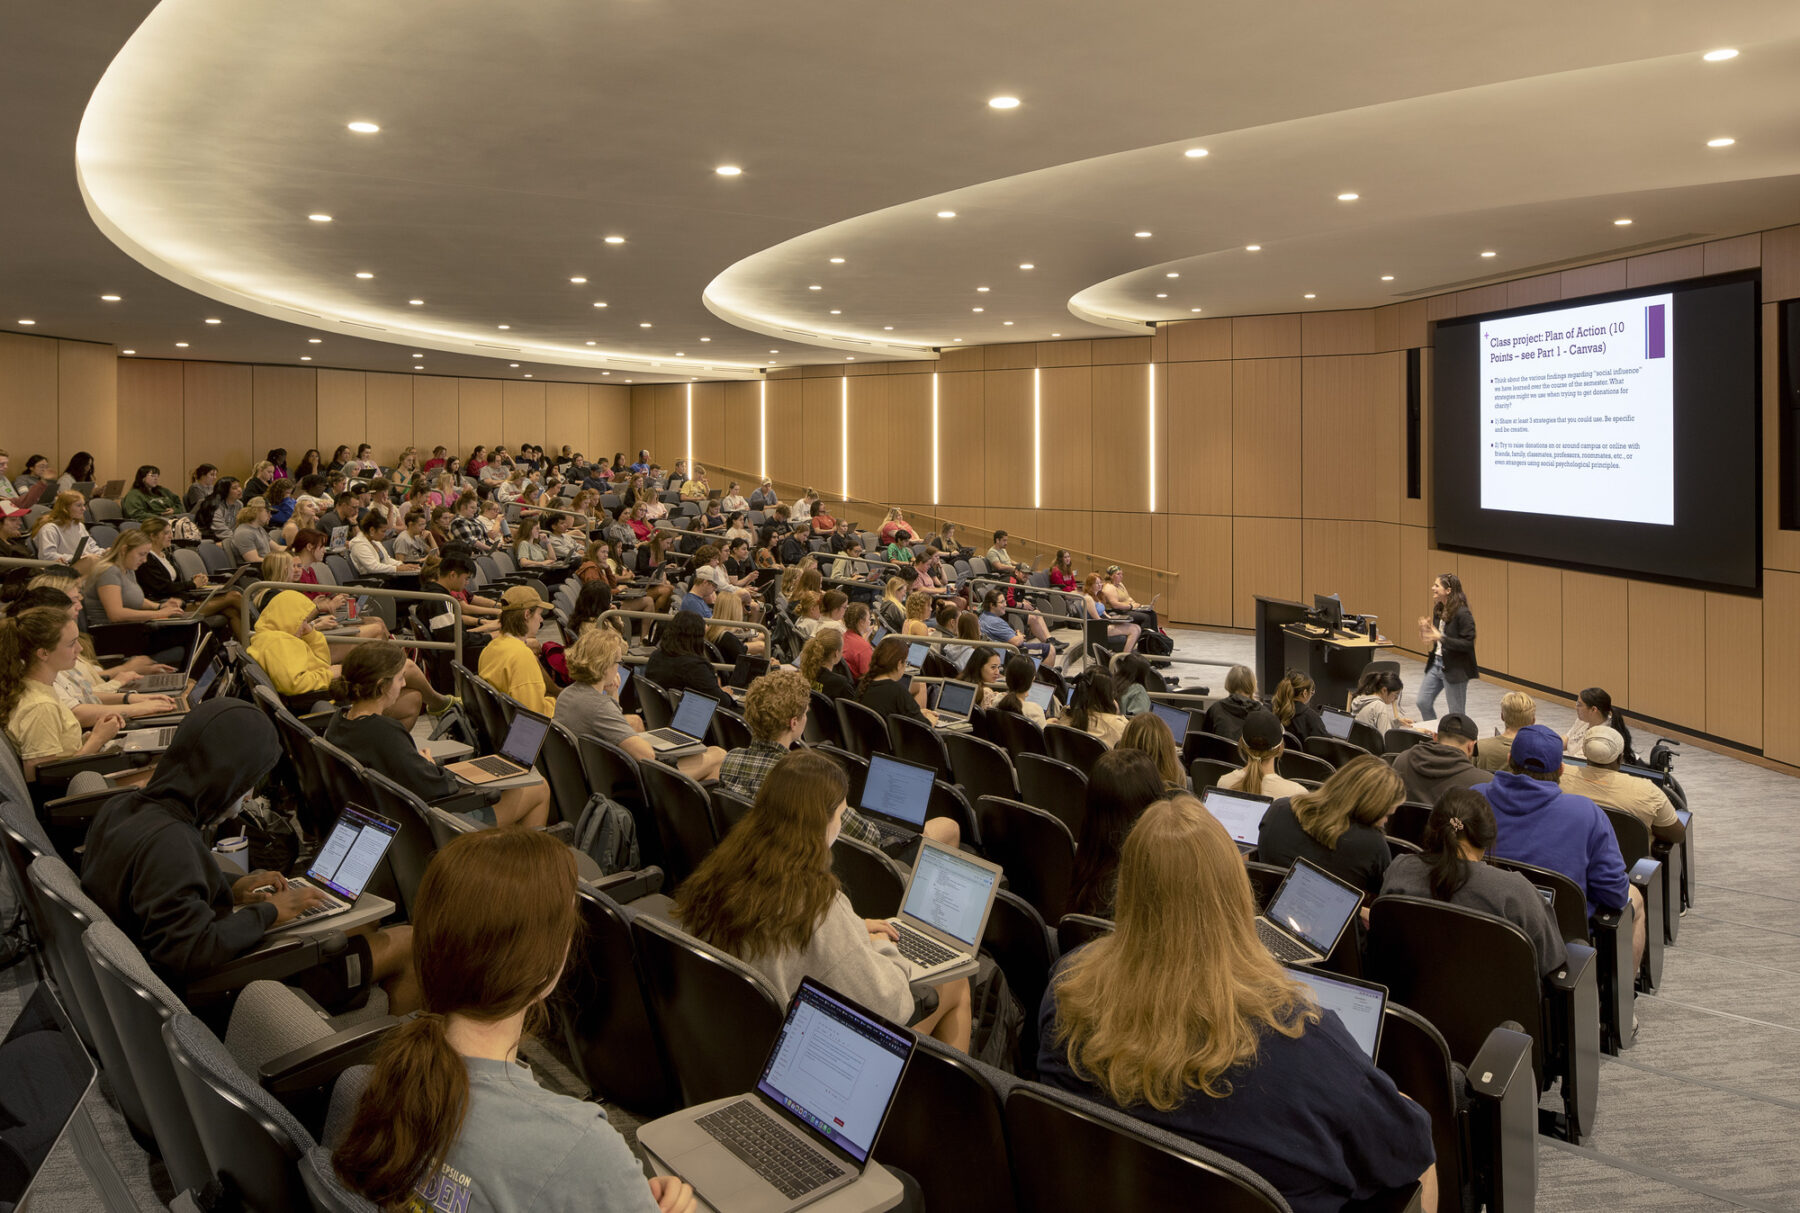 Photo of lecture hall filled with students taking notes on laptops and faculty presenting in front